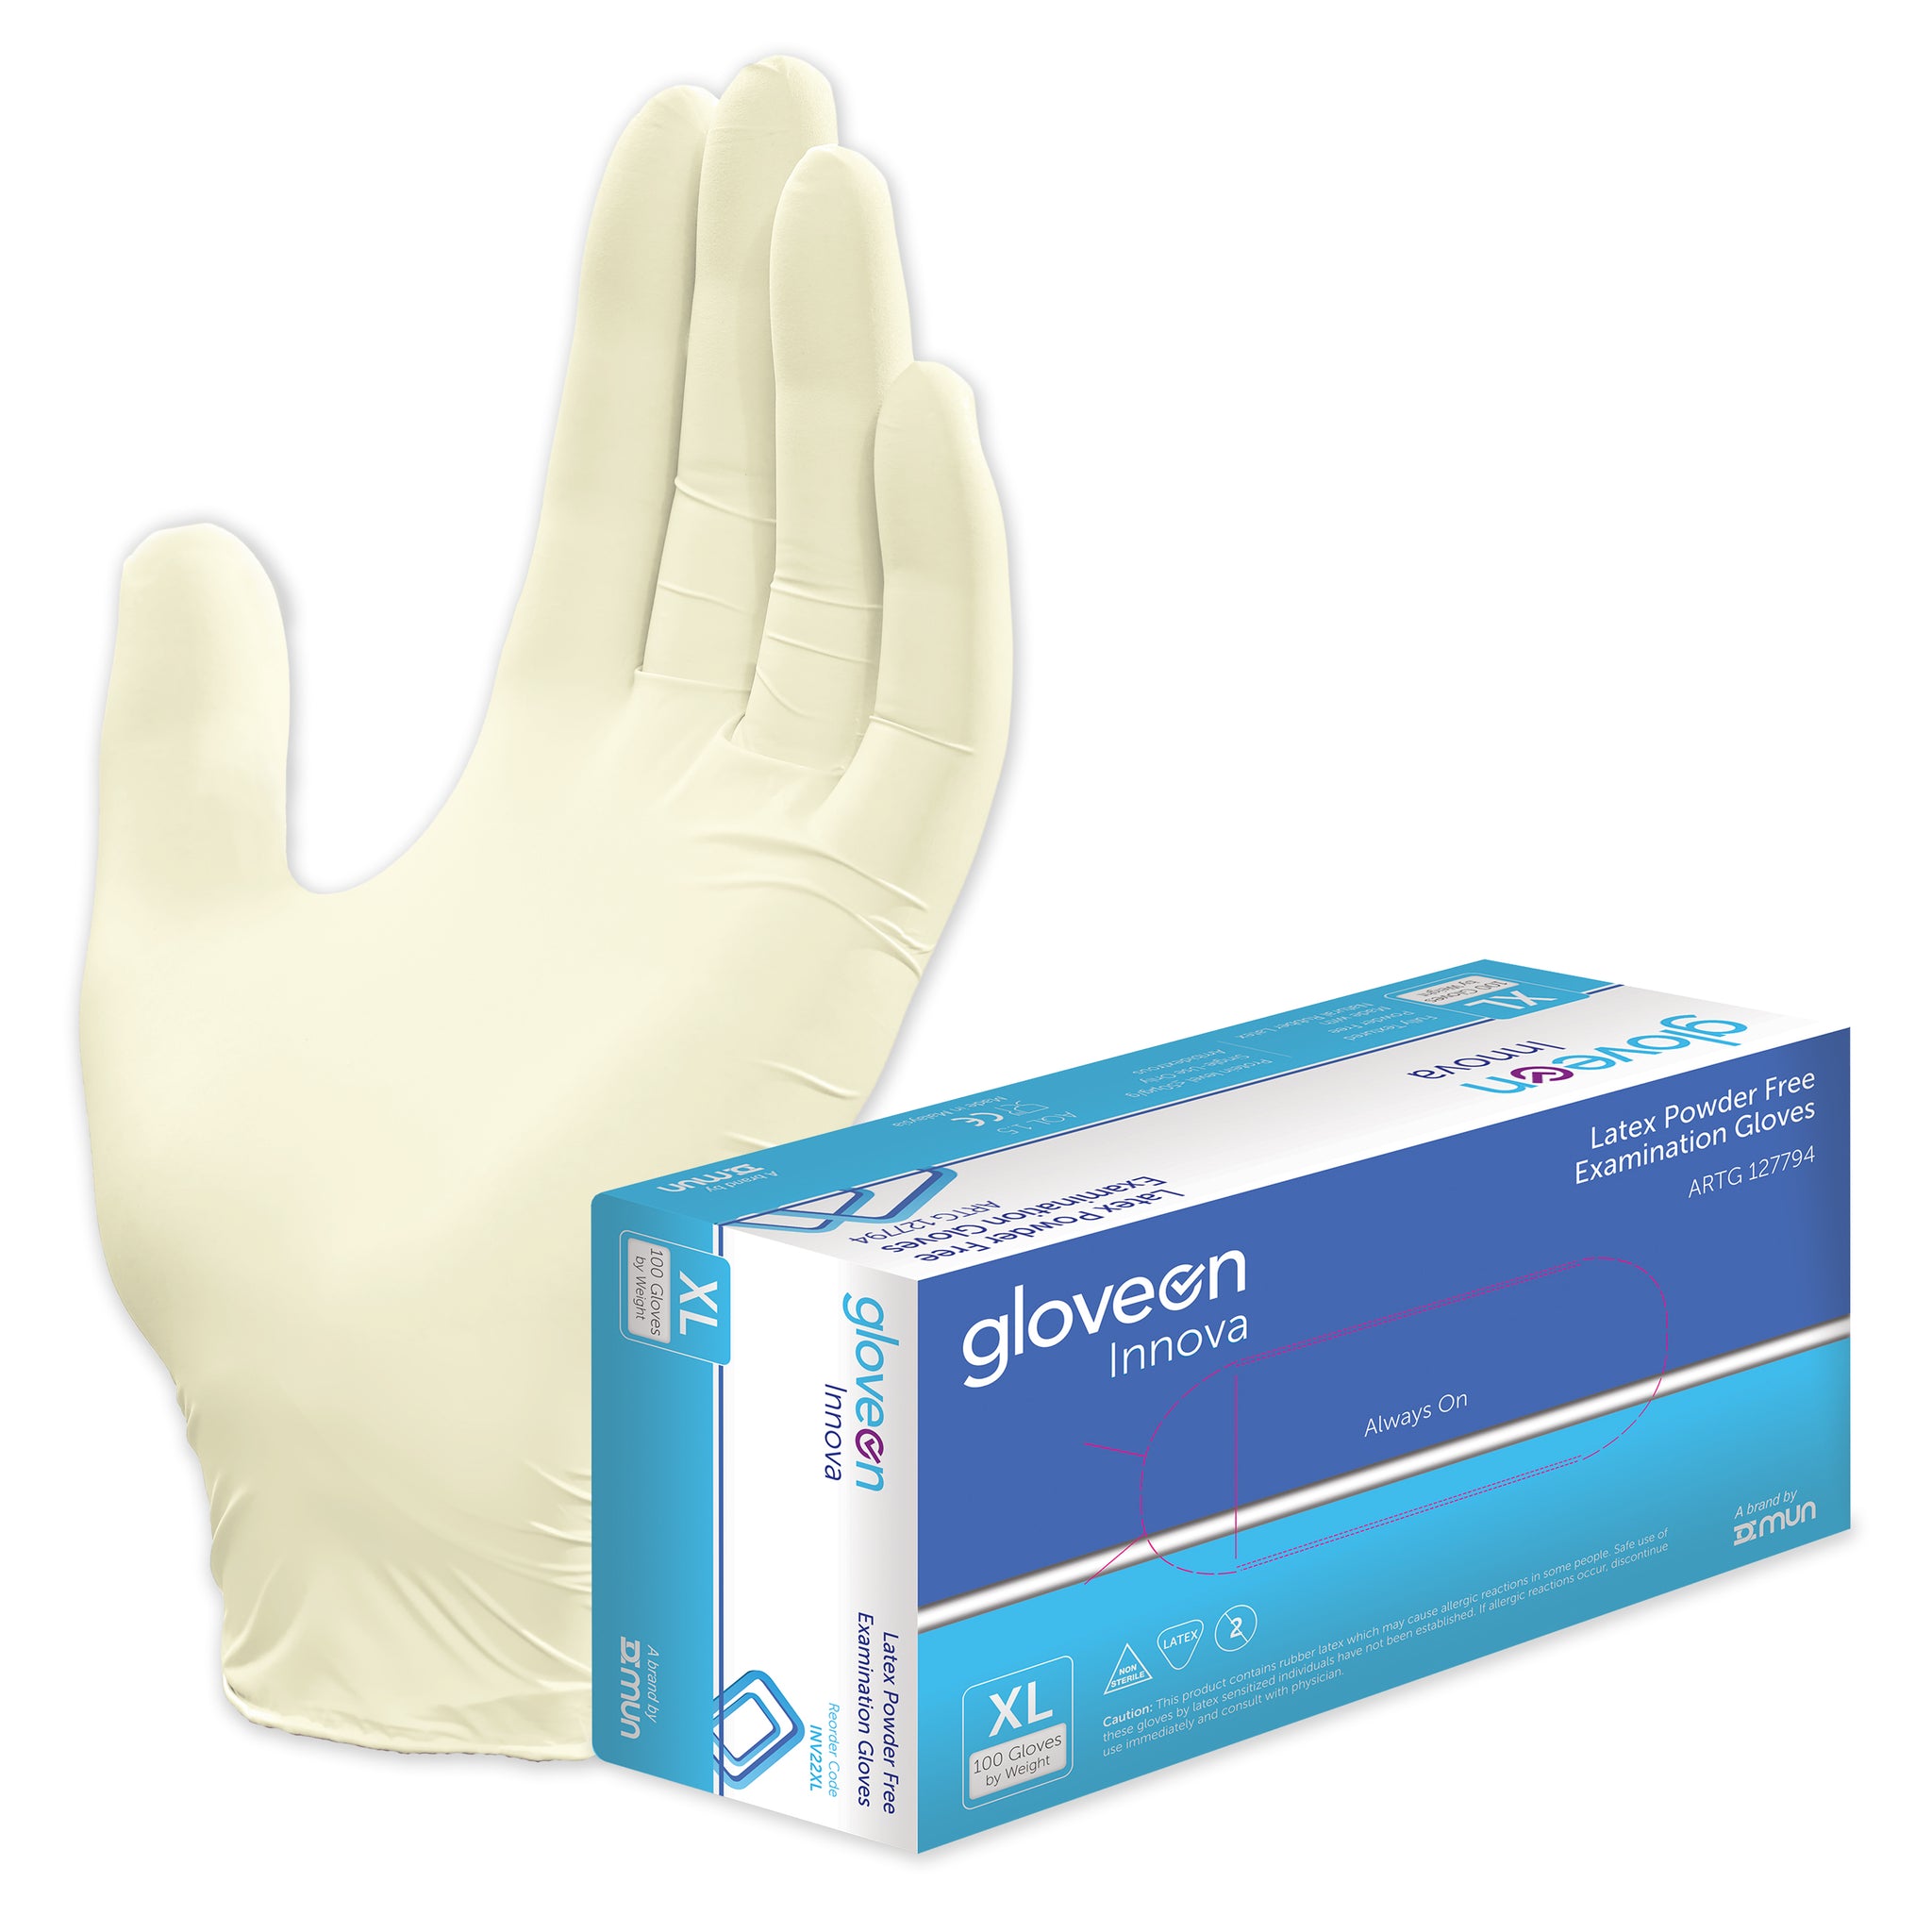 Exam Gloves, Powder Free, Non-Sterile, Fully Textured, Standard Cuff, Natural Colour - Box of 100, XL